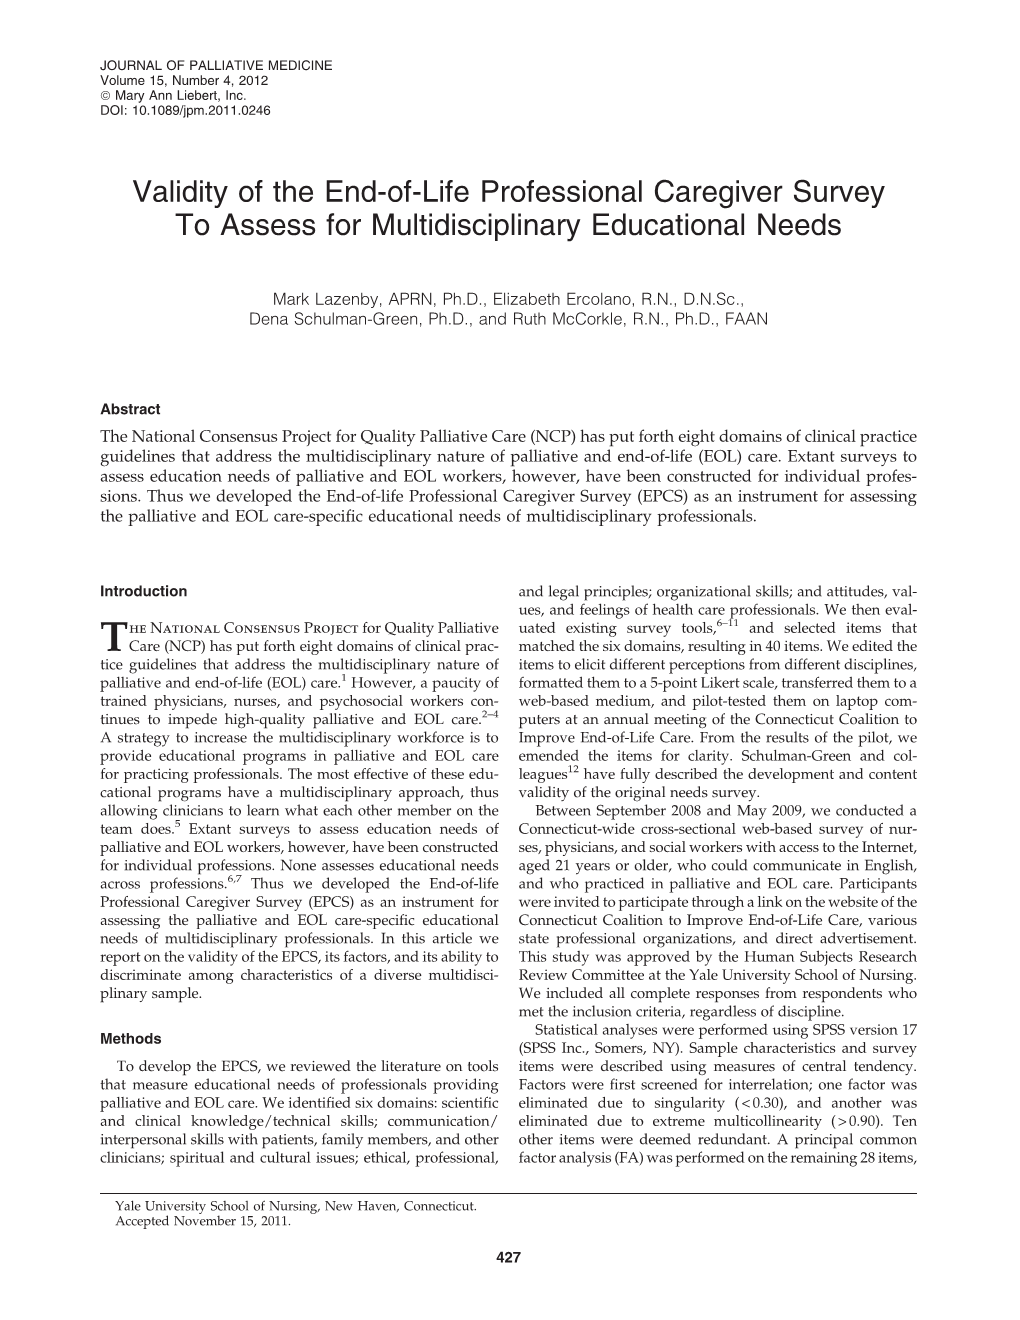 Validity of the End-Of-Life Professional Caregiver Survey to Assess for Multidisciplinary Educational Needs